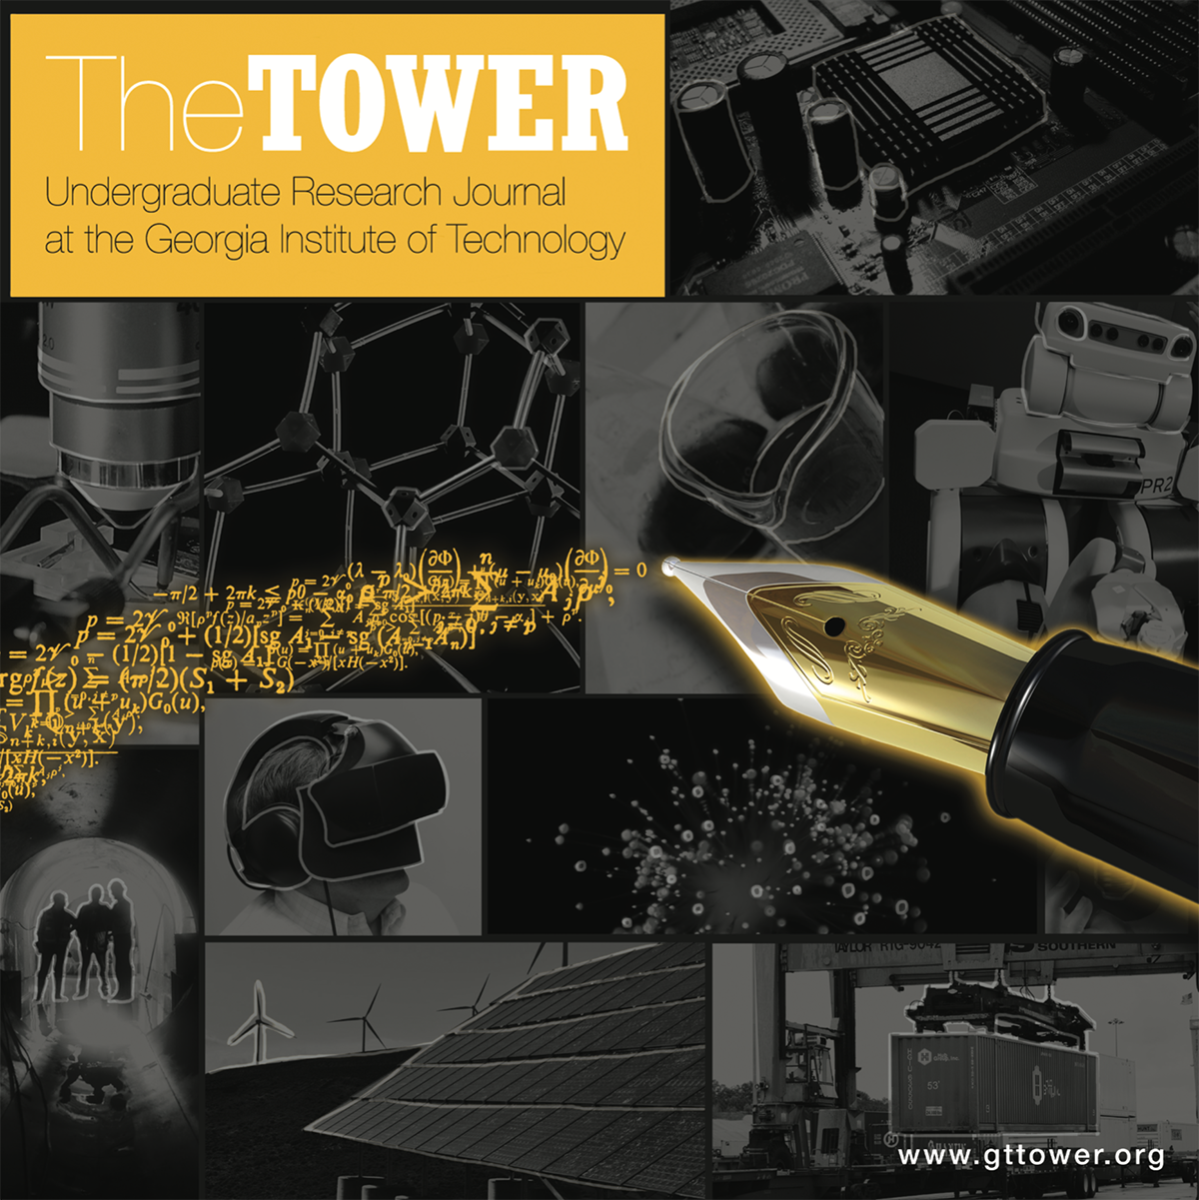 The Tower 2011 cover.